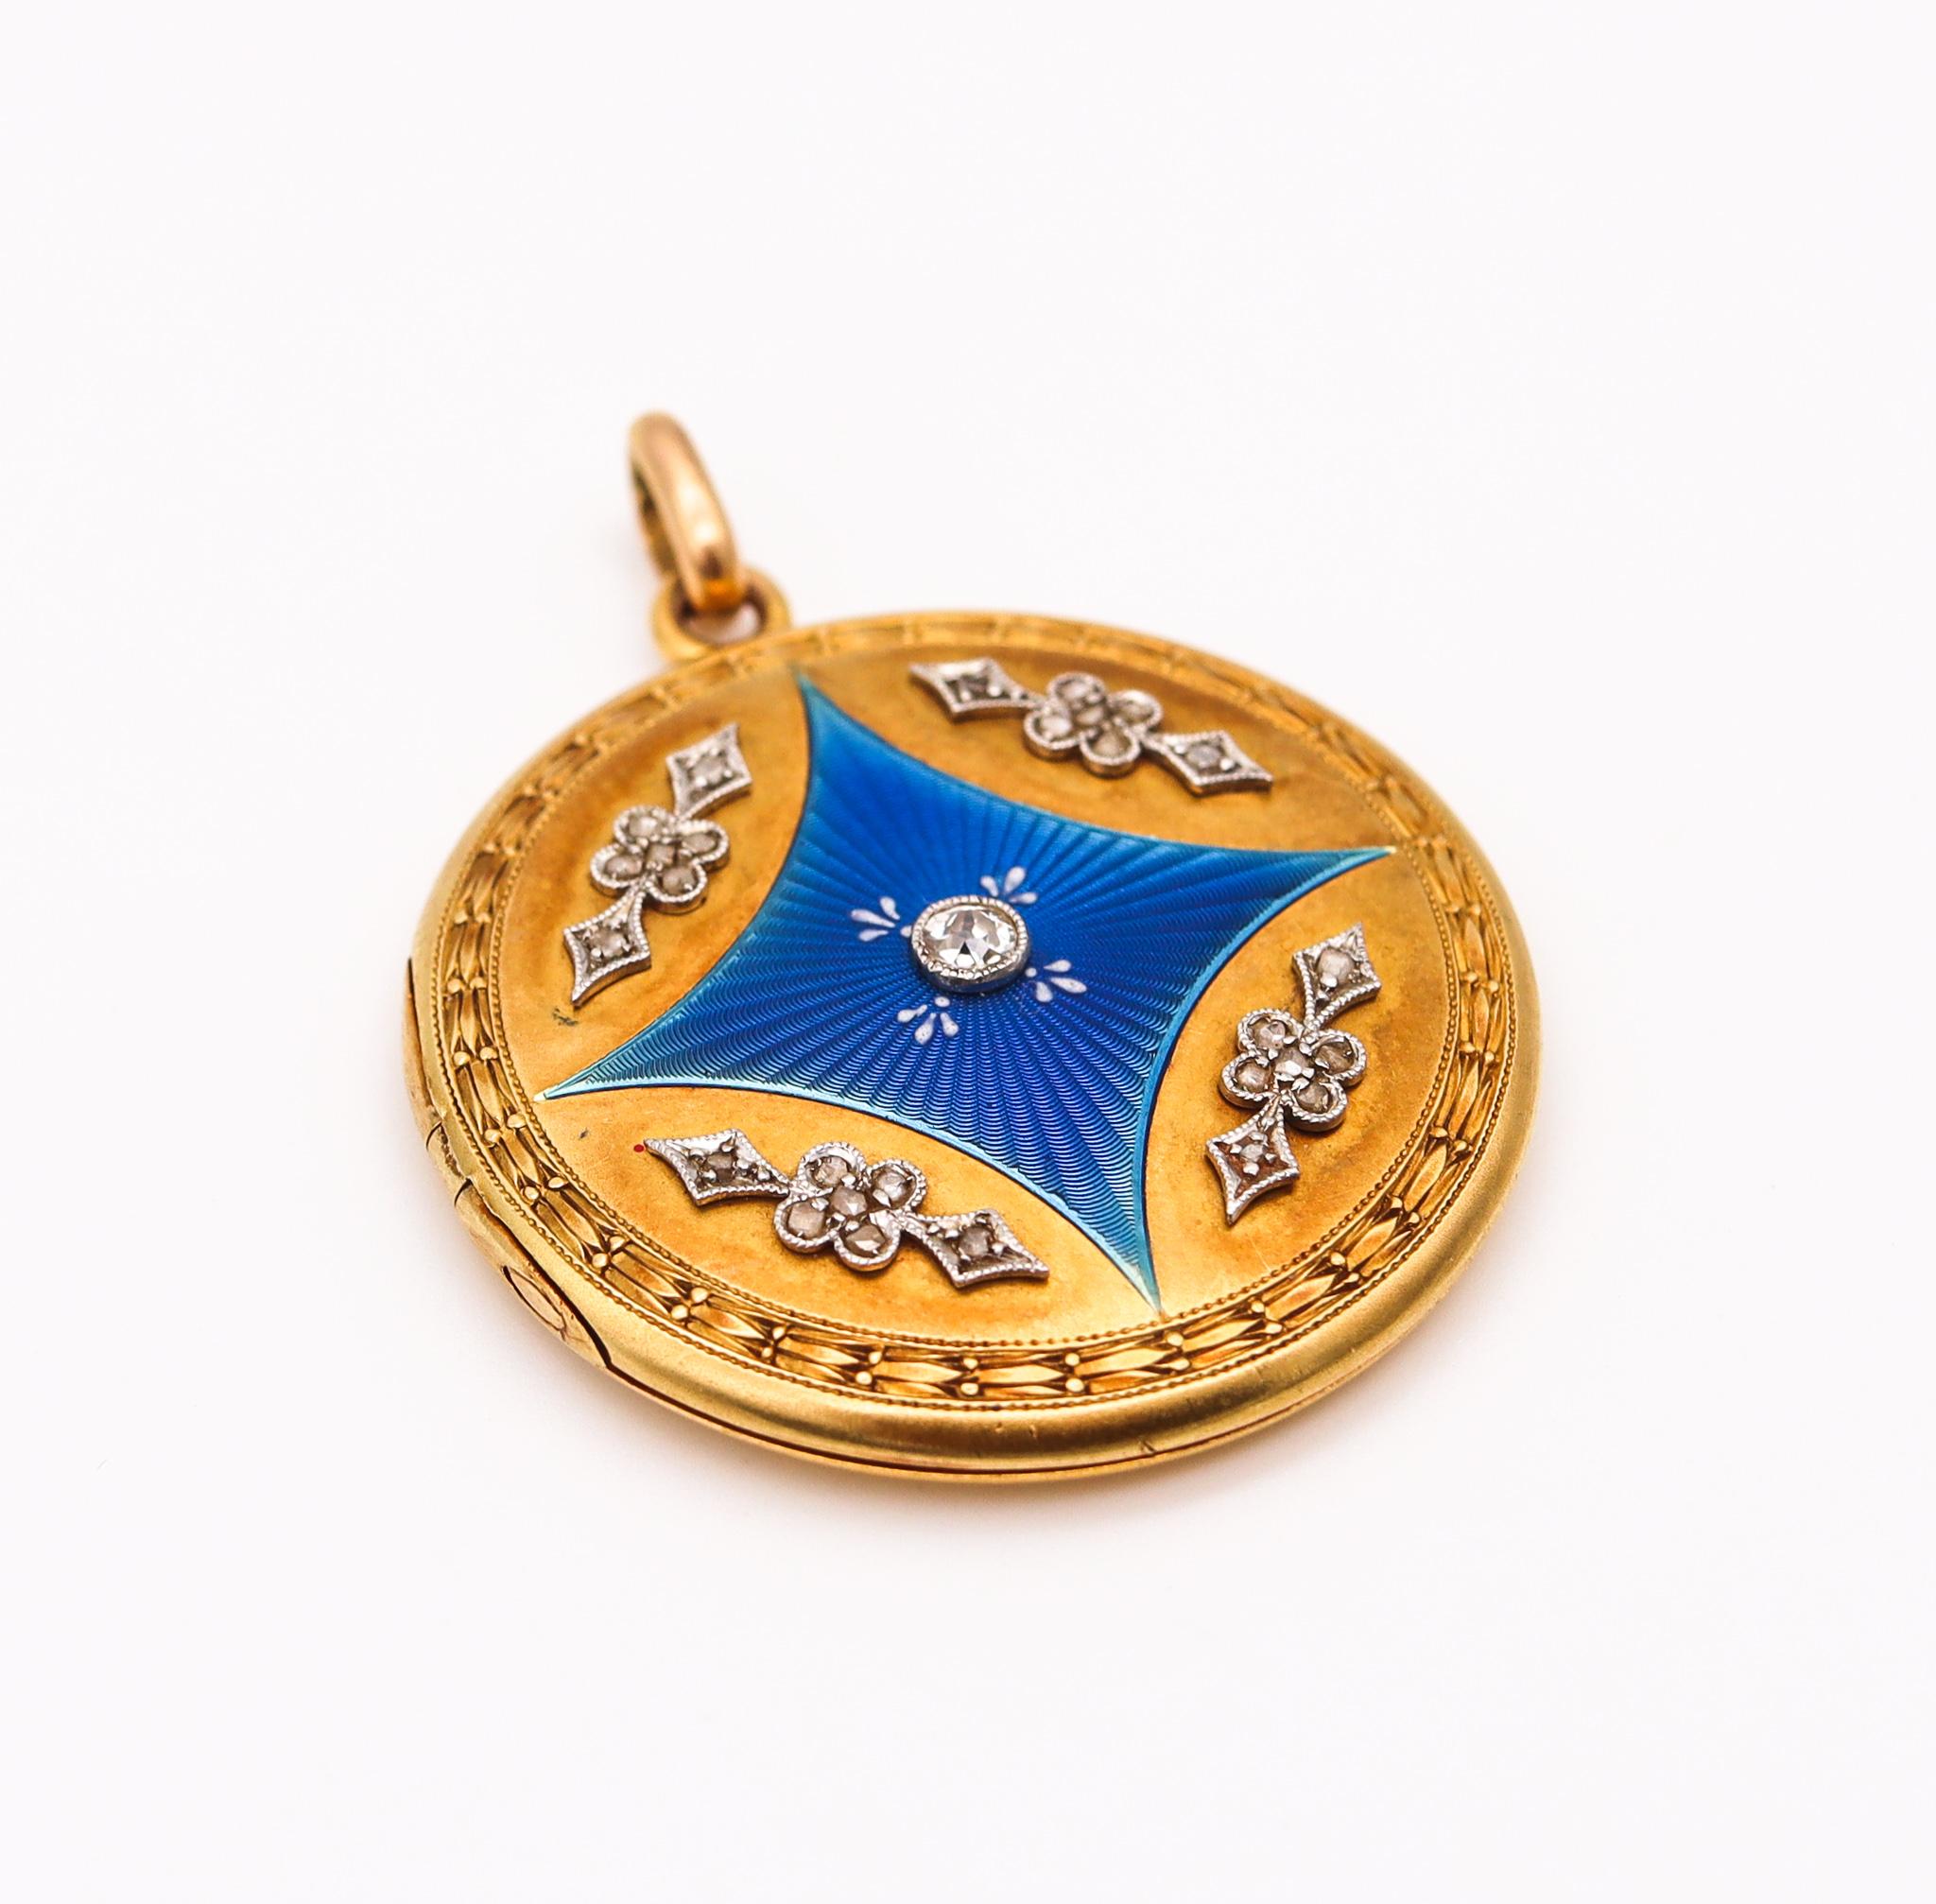 German locket pendant from the Edwardian period.

Fabulous round locket pendant, created during the Edwardian period in Germany back in the 1900. This beautiful colorful piece has been crafted in solid yellow gold of 18 karats with accents in